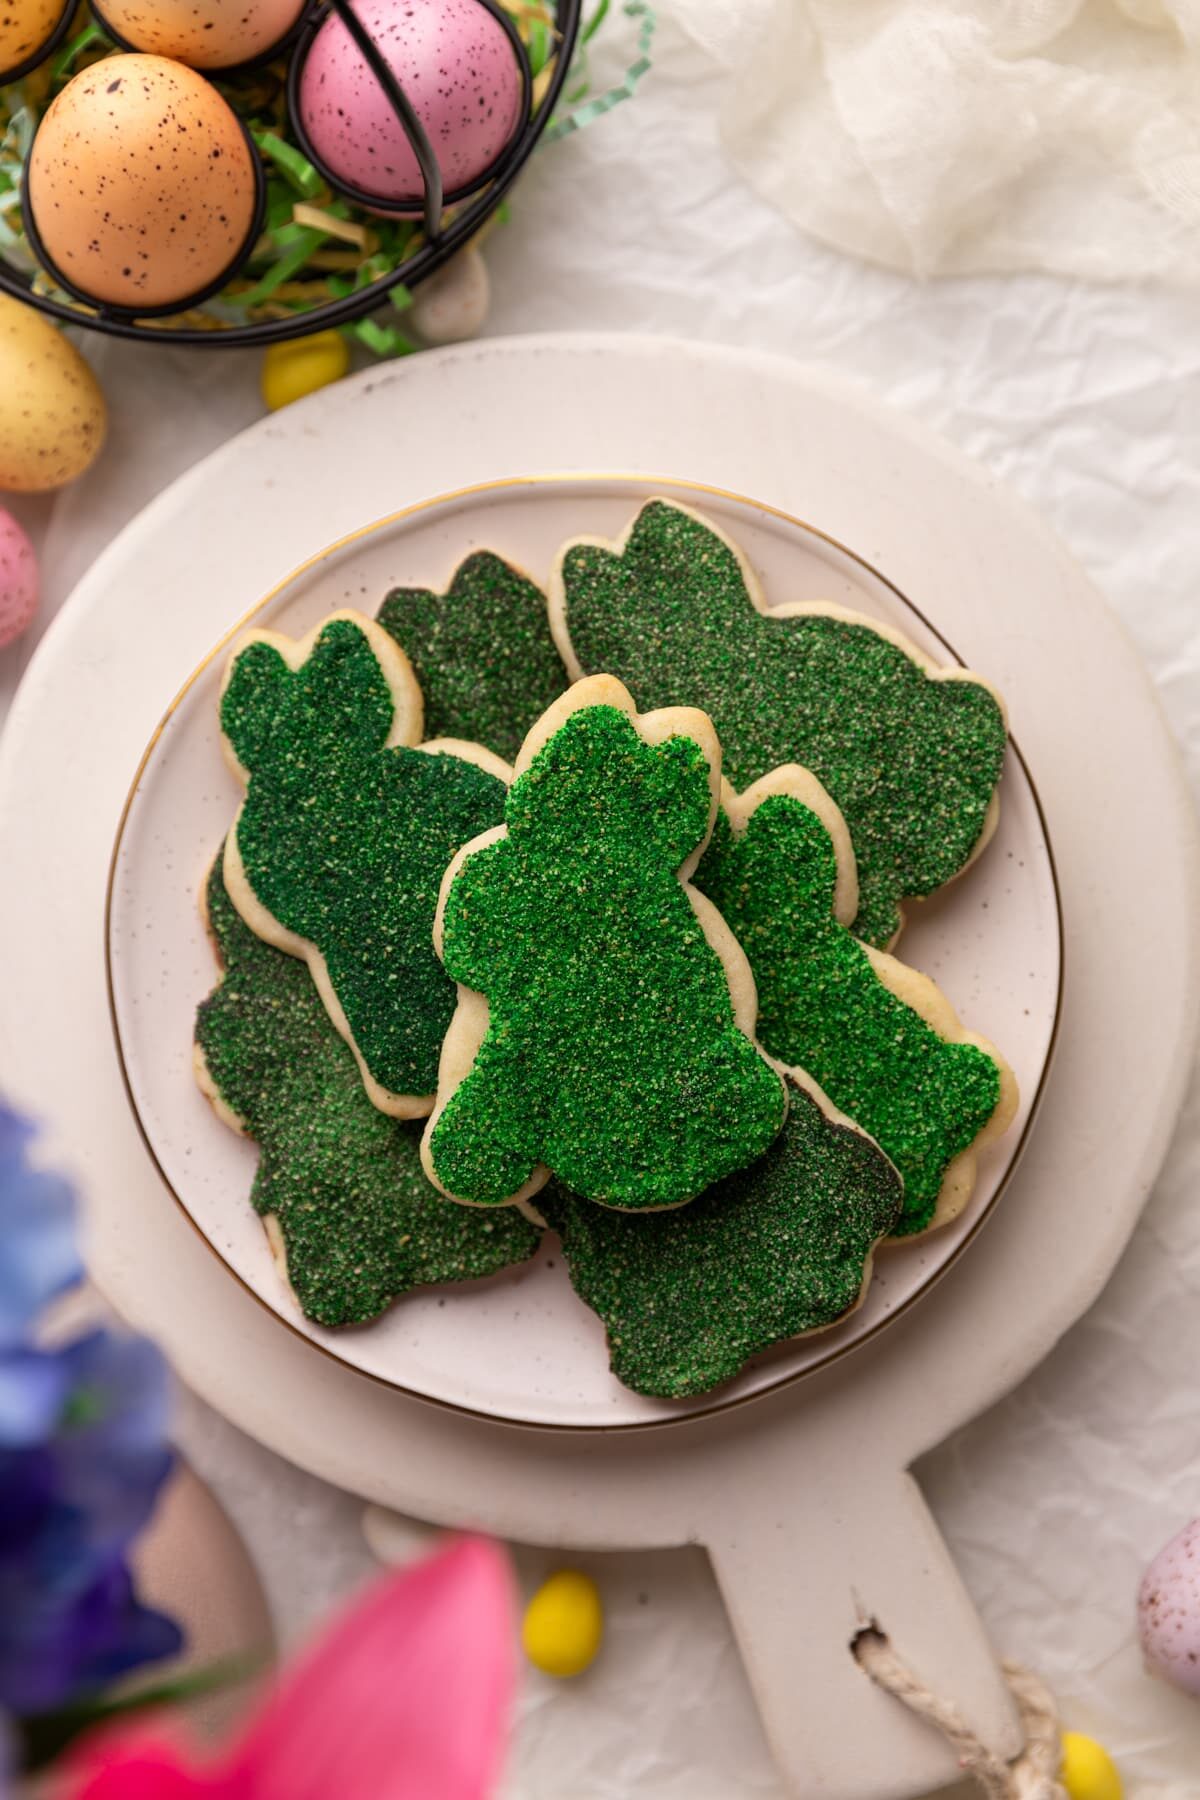 sugar cookies decorated with edible moss on serving plate.